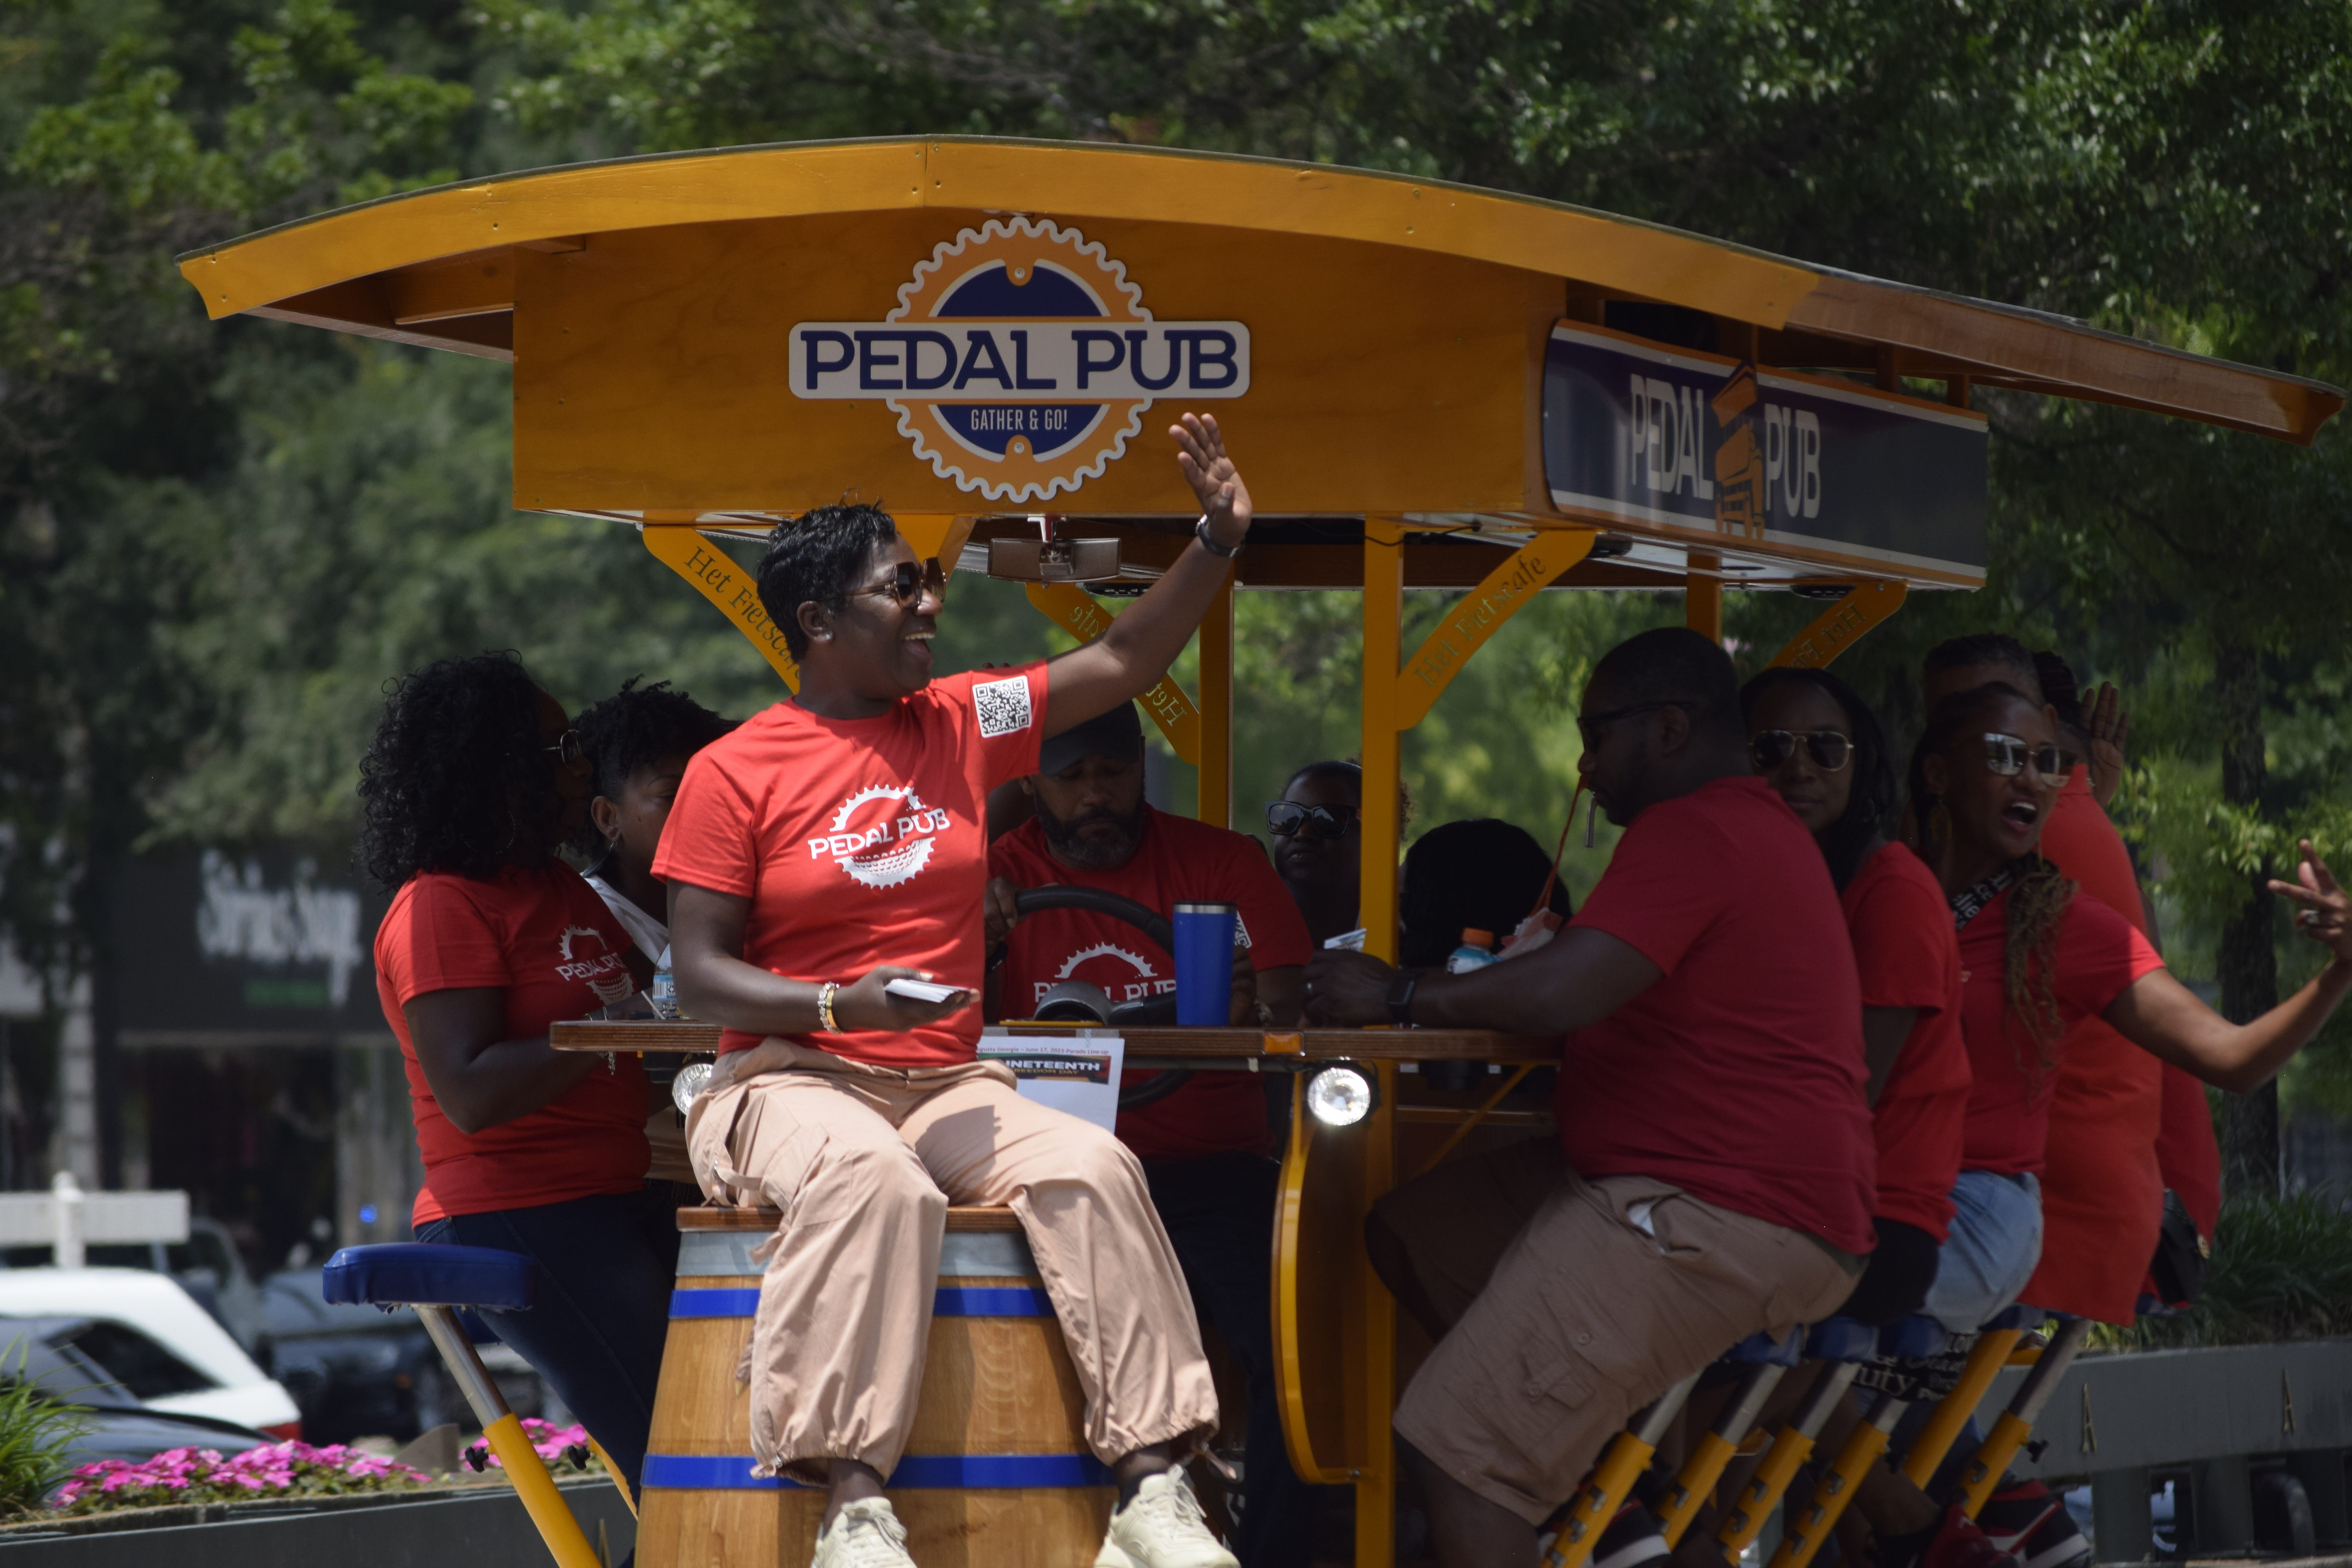 With the NFL Draft in town -- Pedal pubs are seeing a spike in business